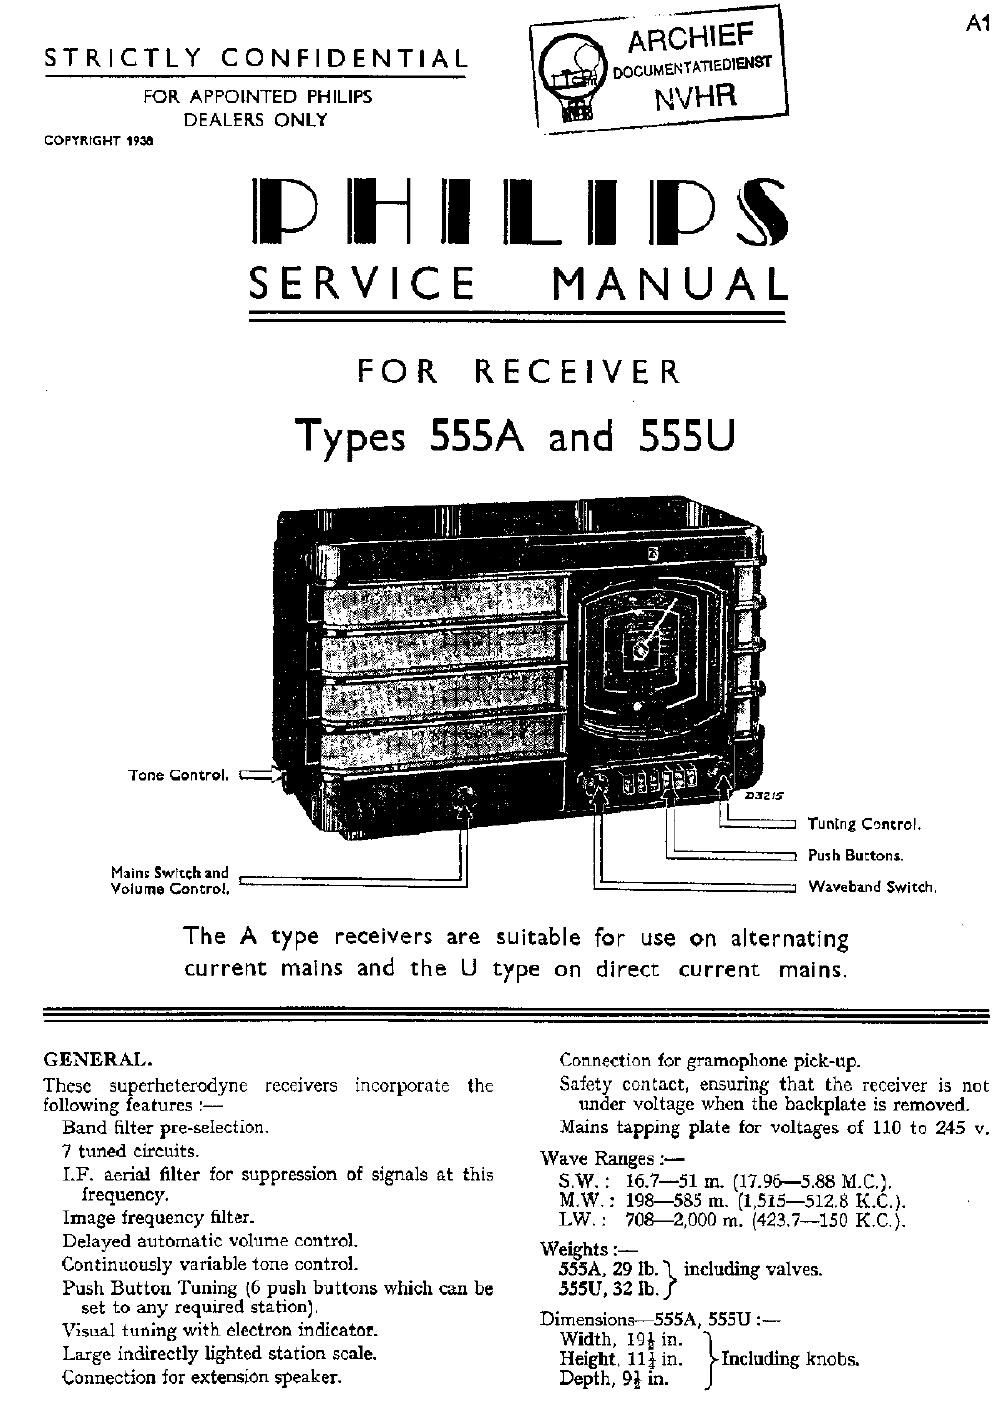 philips 555 a 2 service manual